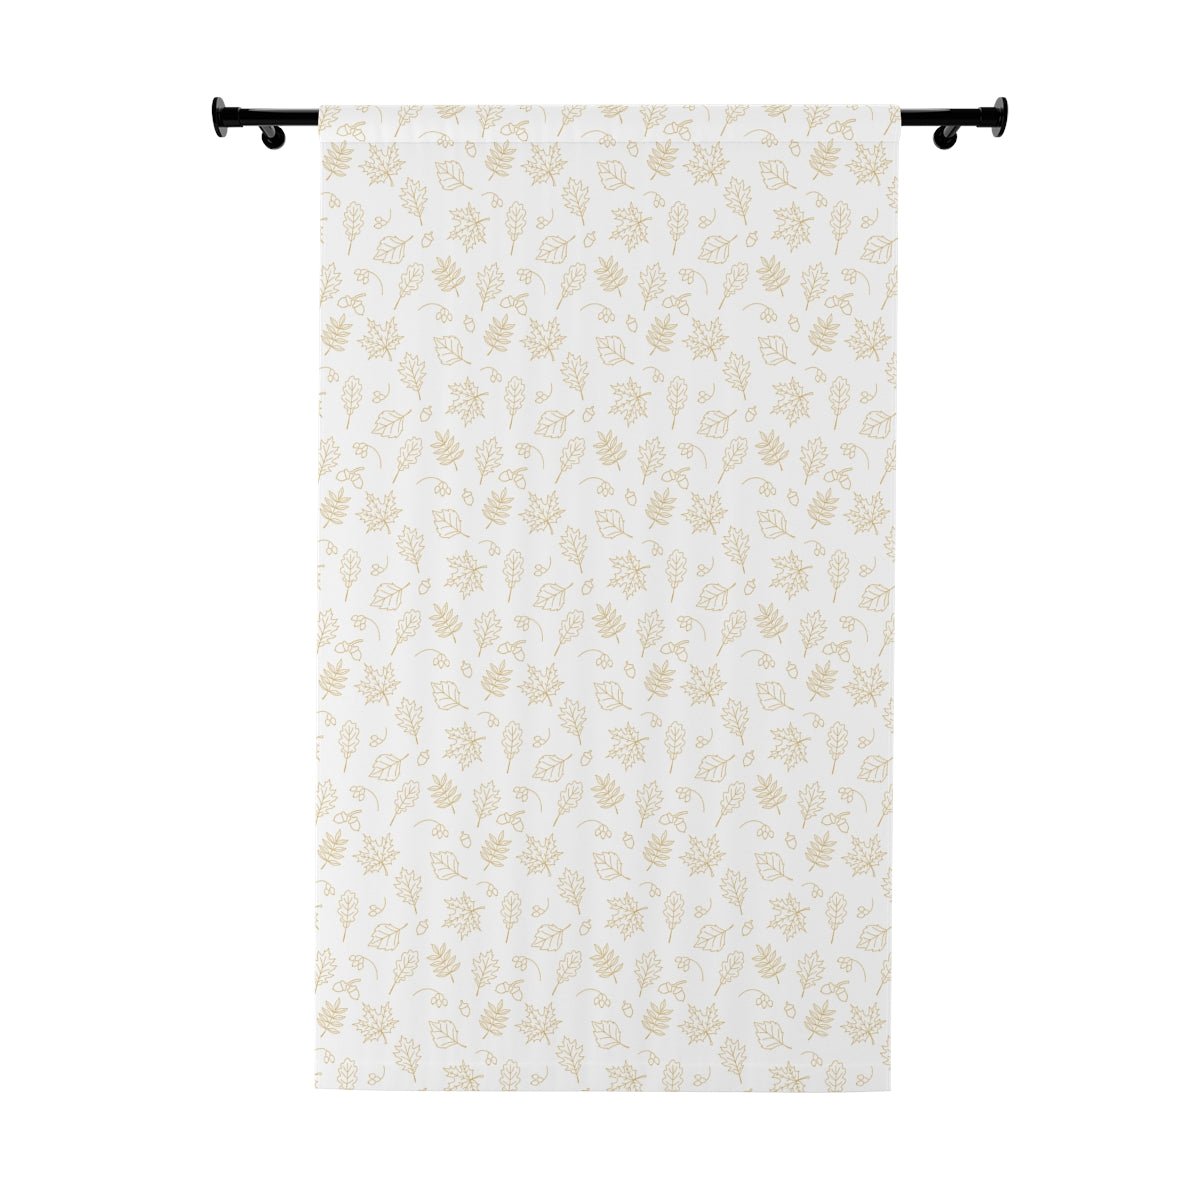 Acorns and Leaves Window Curtains (1 Piece) - Puffin Lime